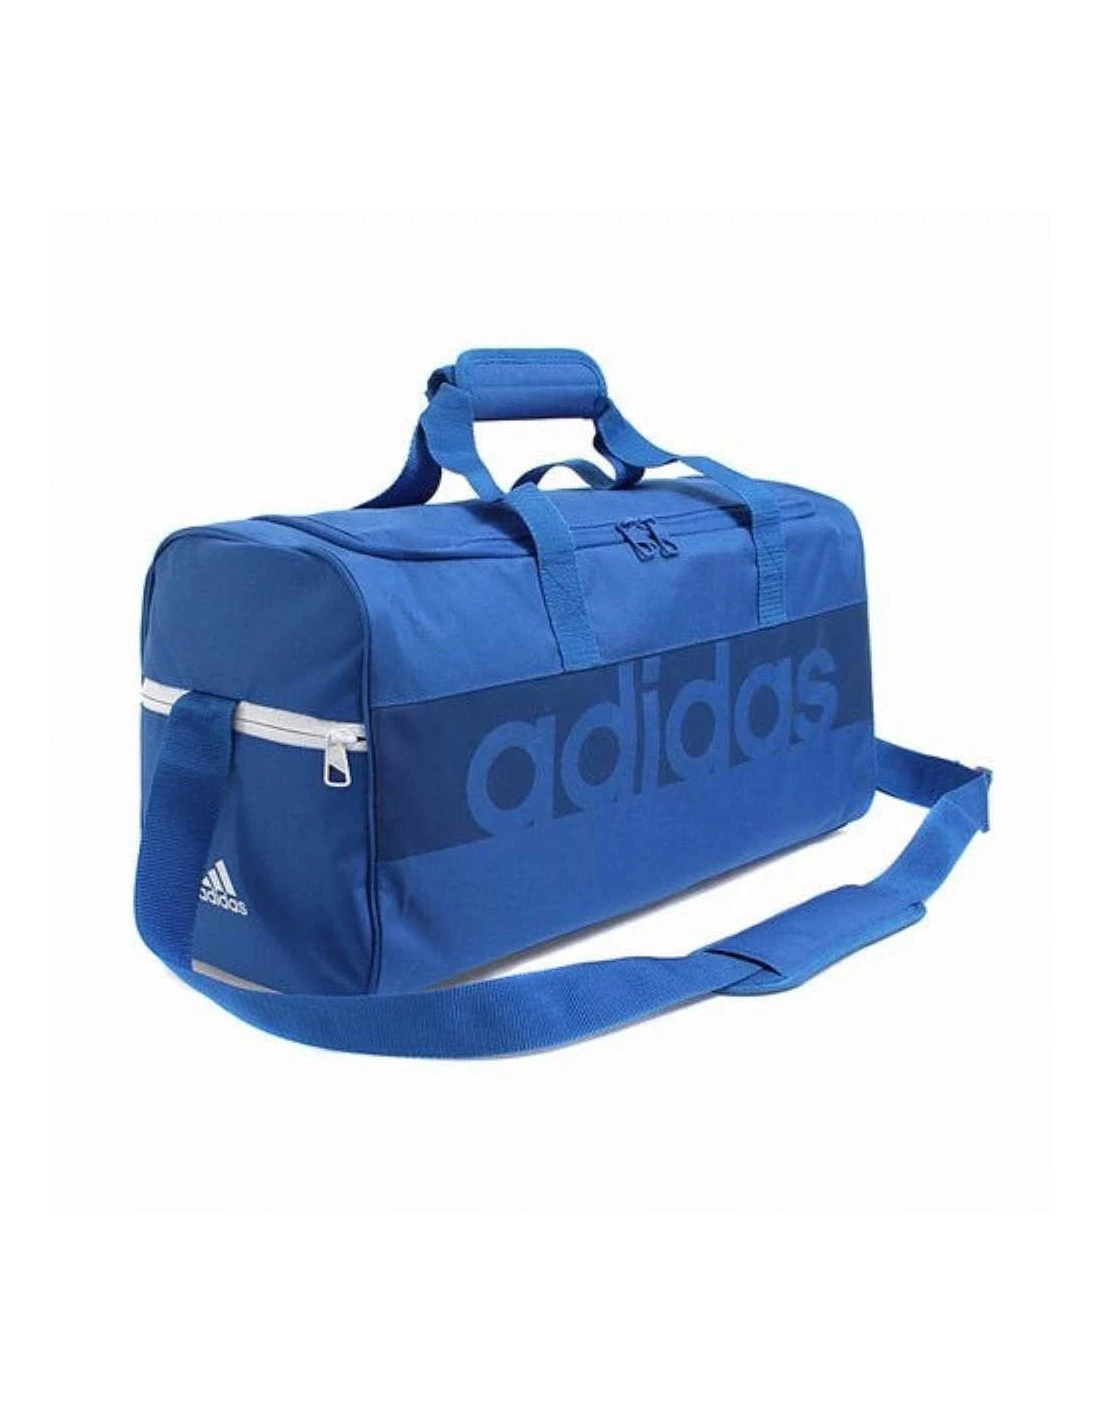 Adidas Tiro Lin TB S sports bag Royal blue gym bag adjustable strap  separate compartments with crem|Gym Bags| - AliExpress